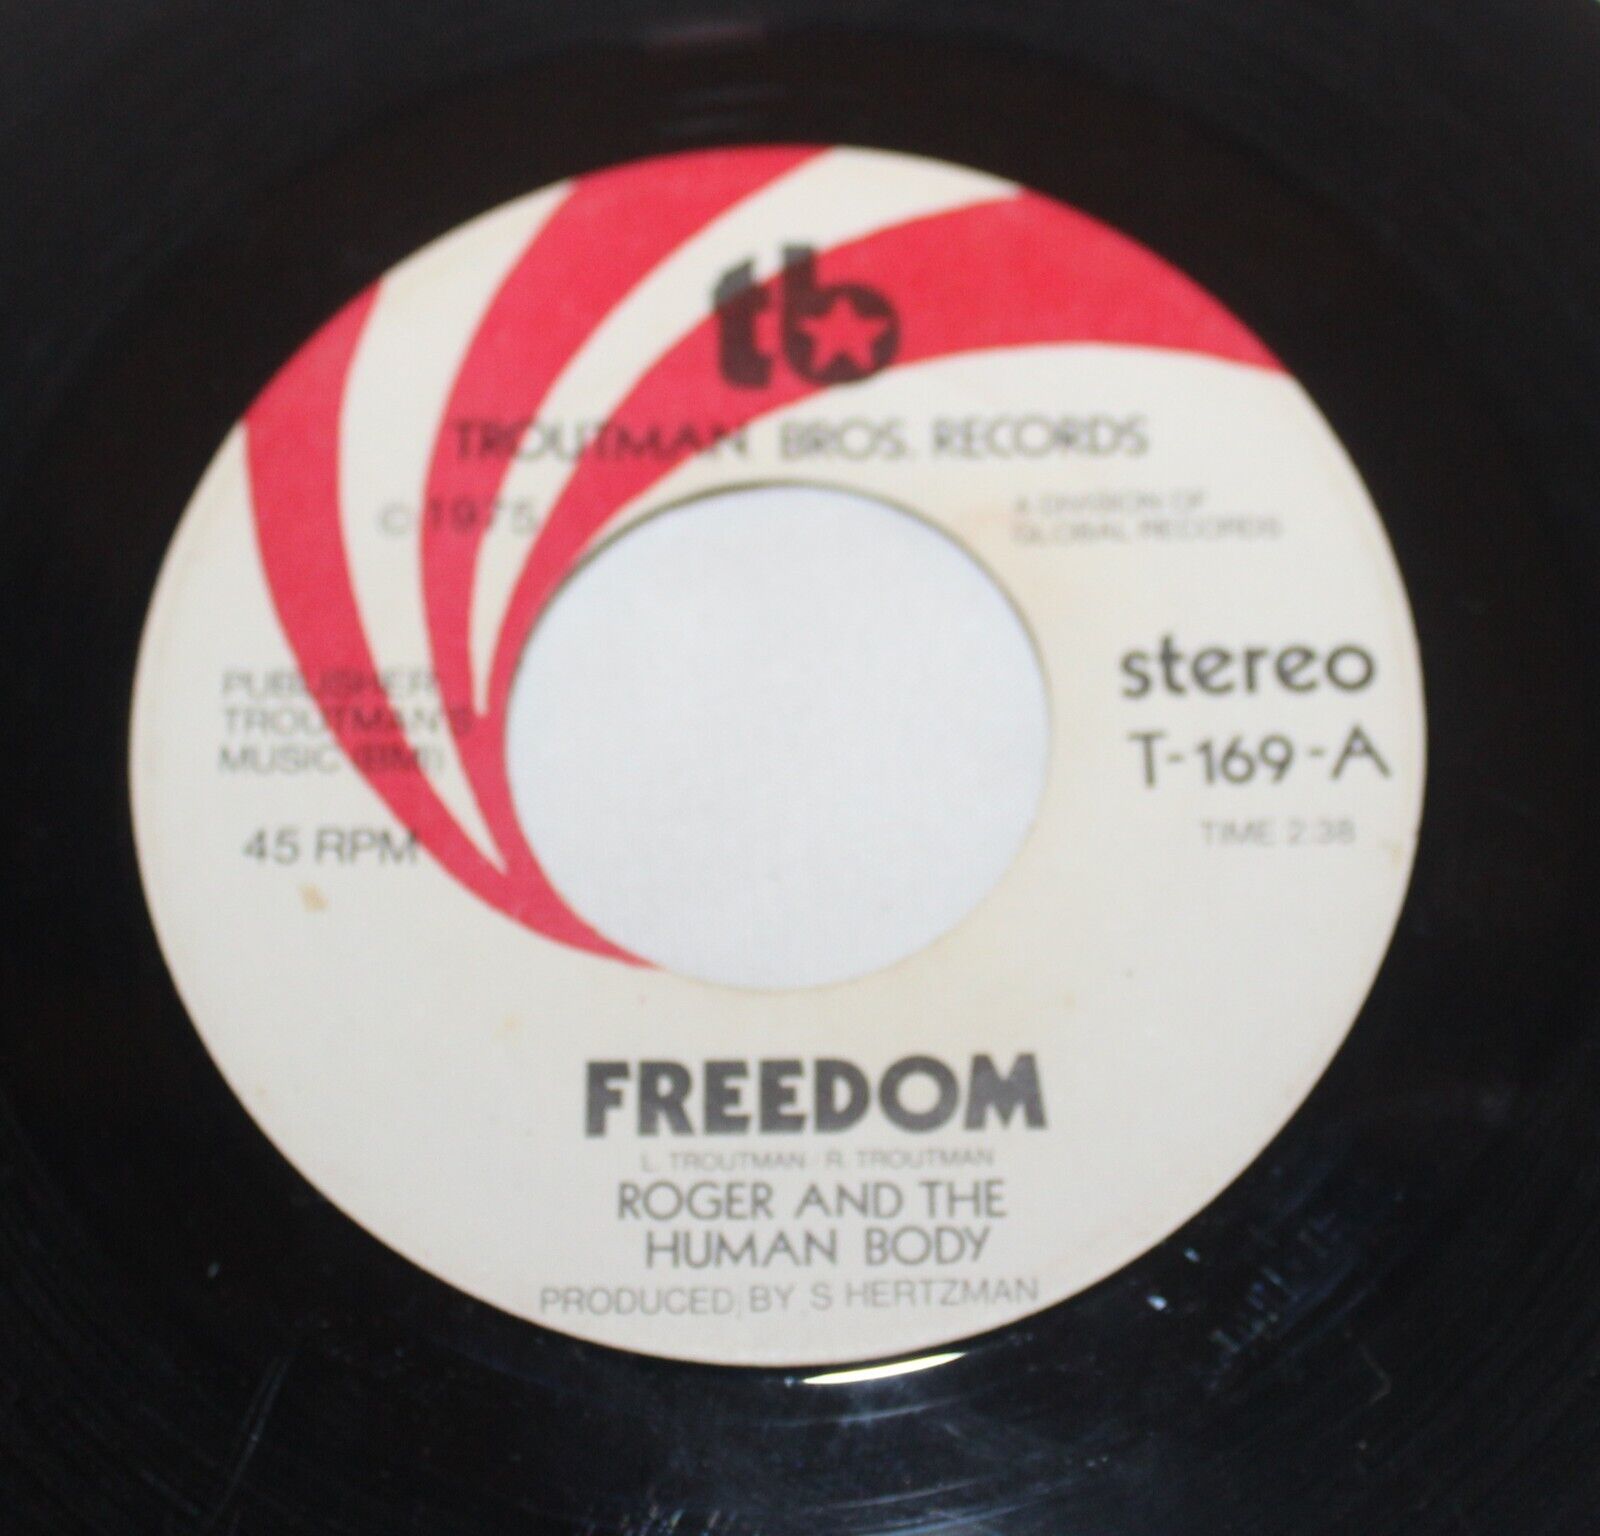 Roger & The Human Body Freedom /Revised Troutman Bros Funk 45 rpm Record T 169